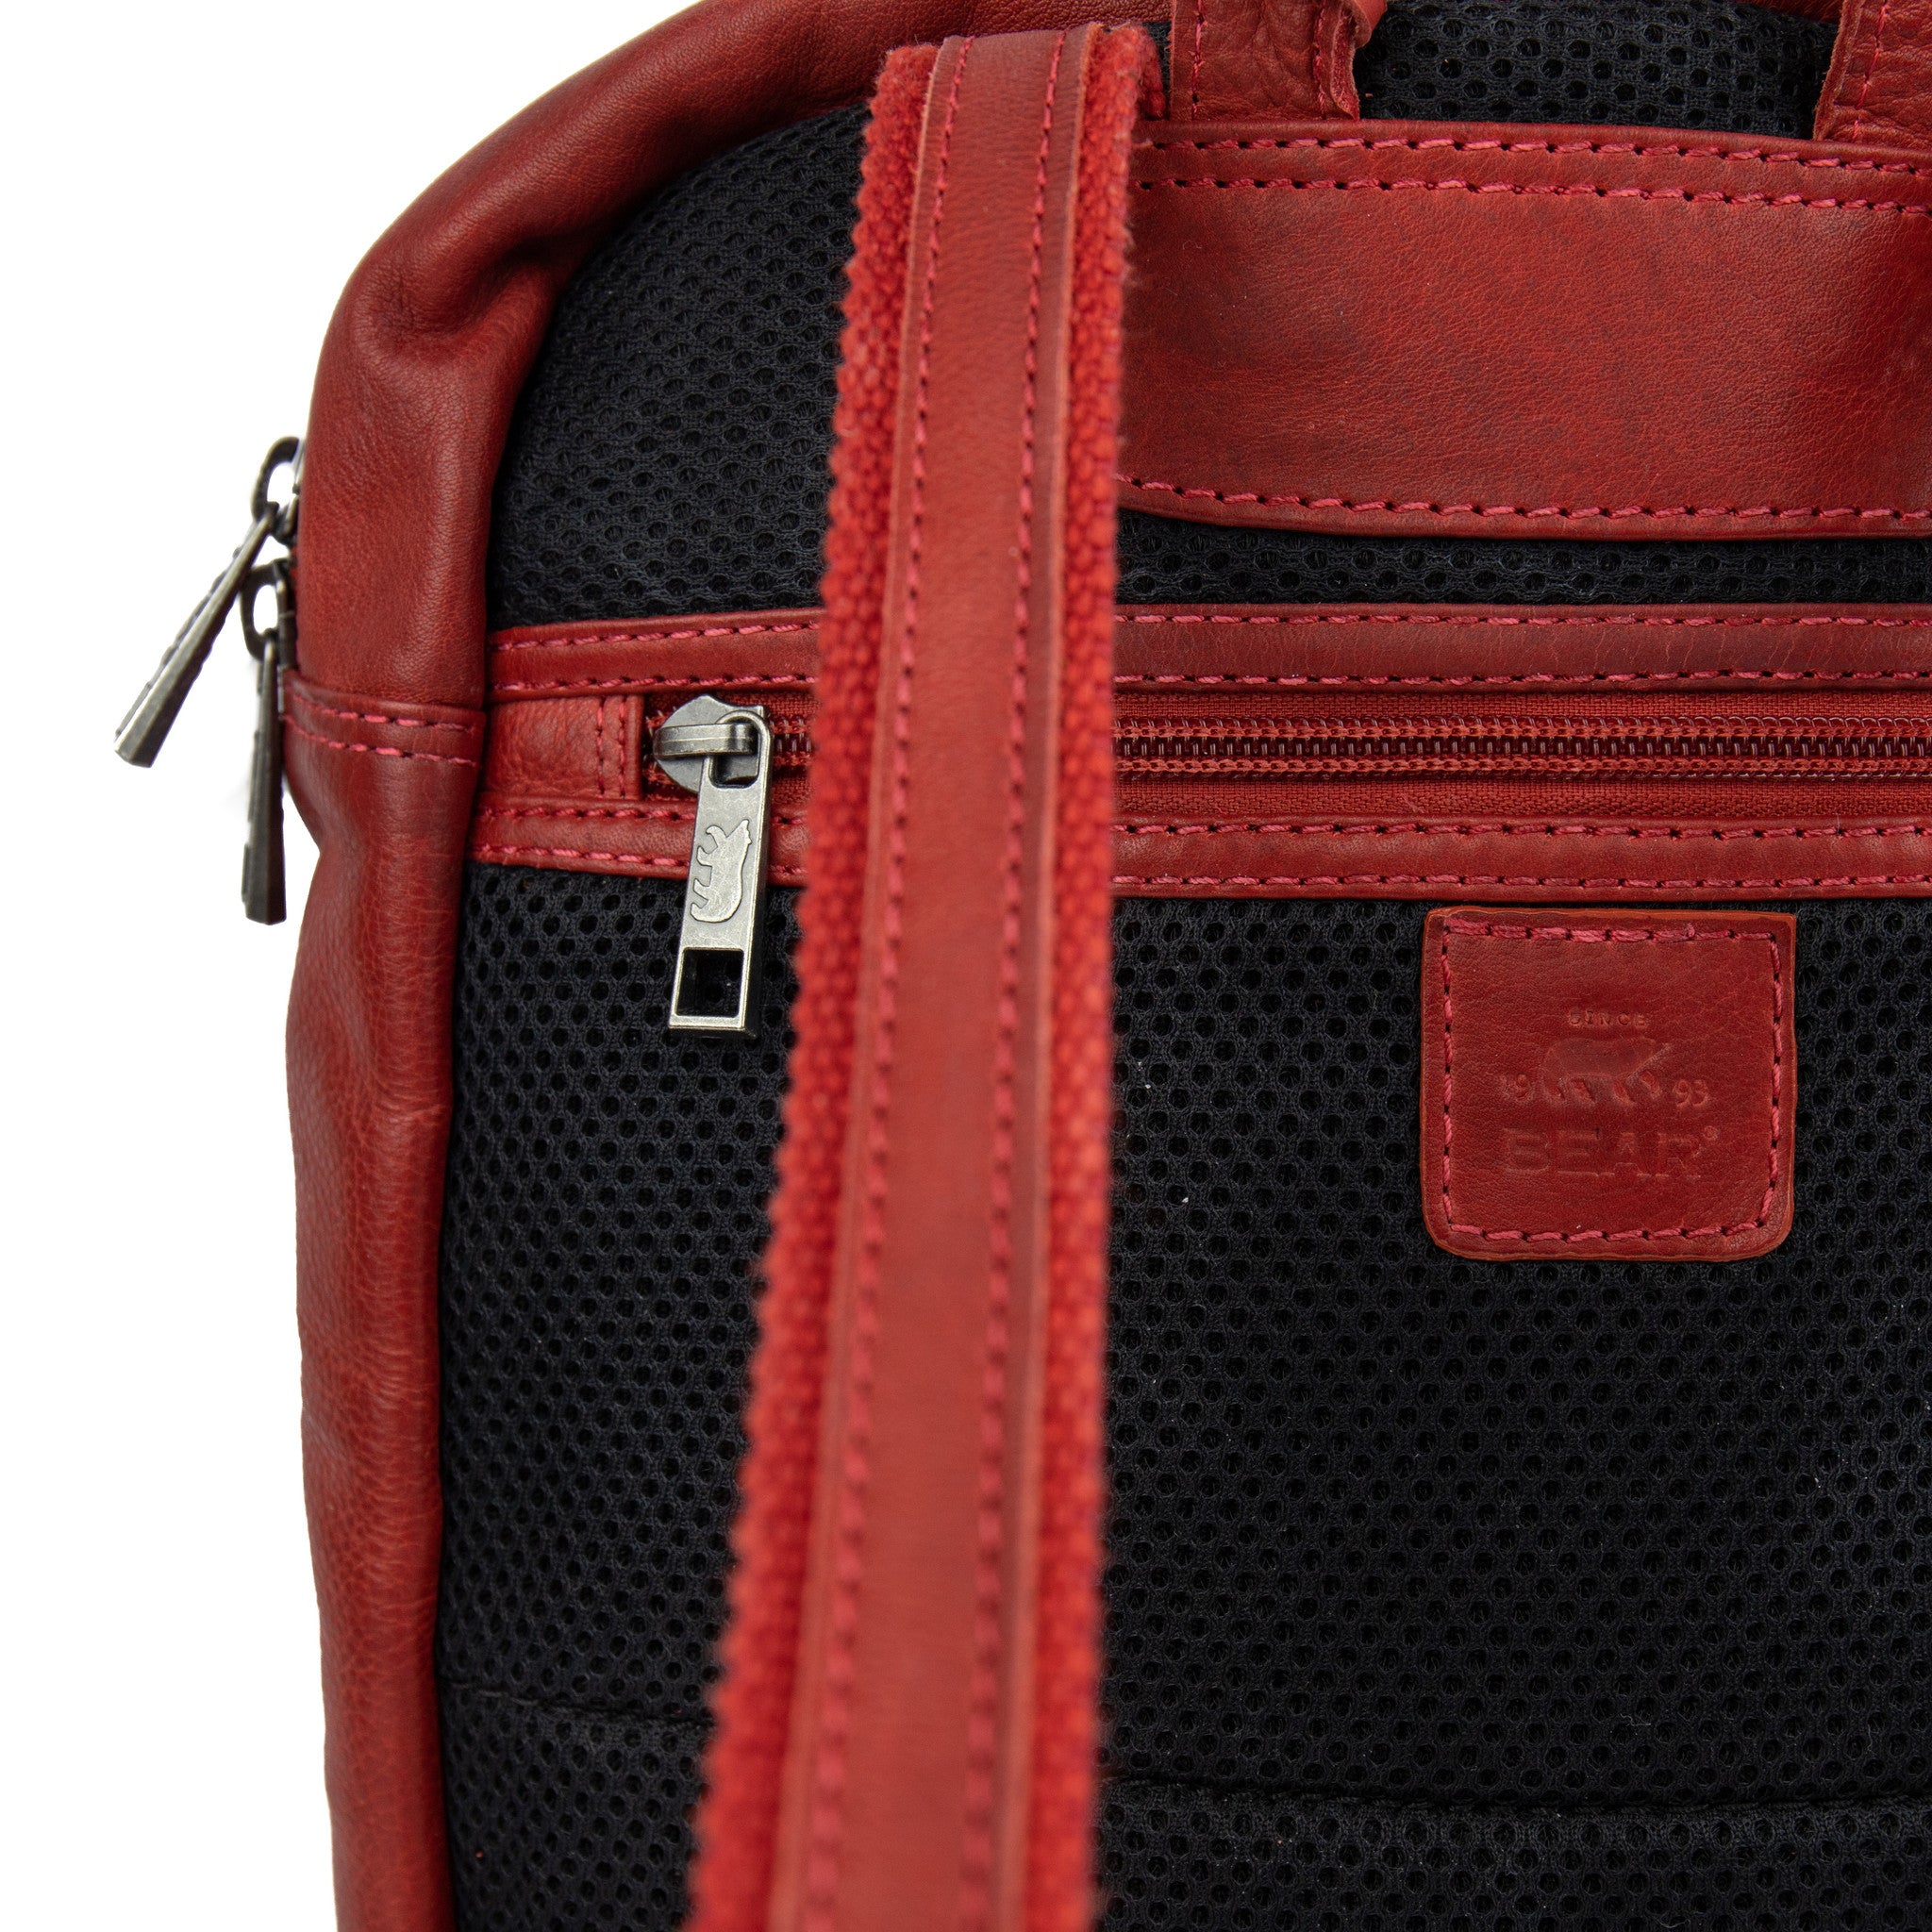 Backpack 'Tiffany' red - CP 1769